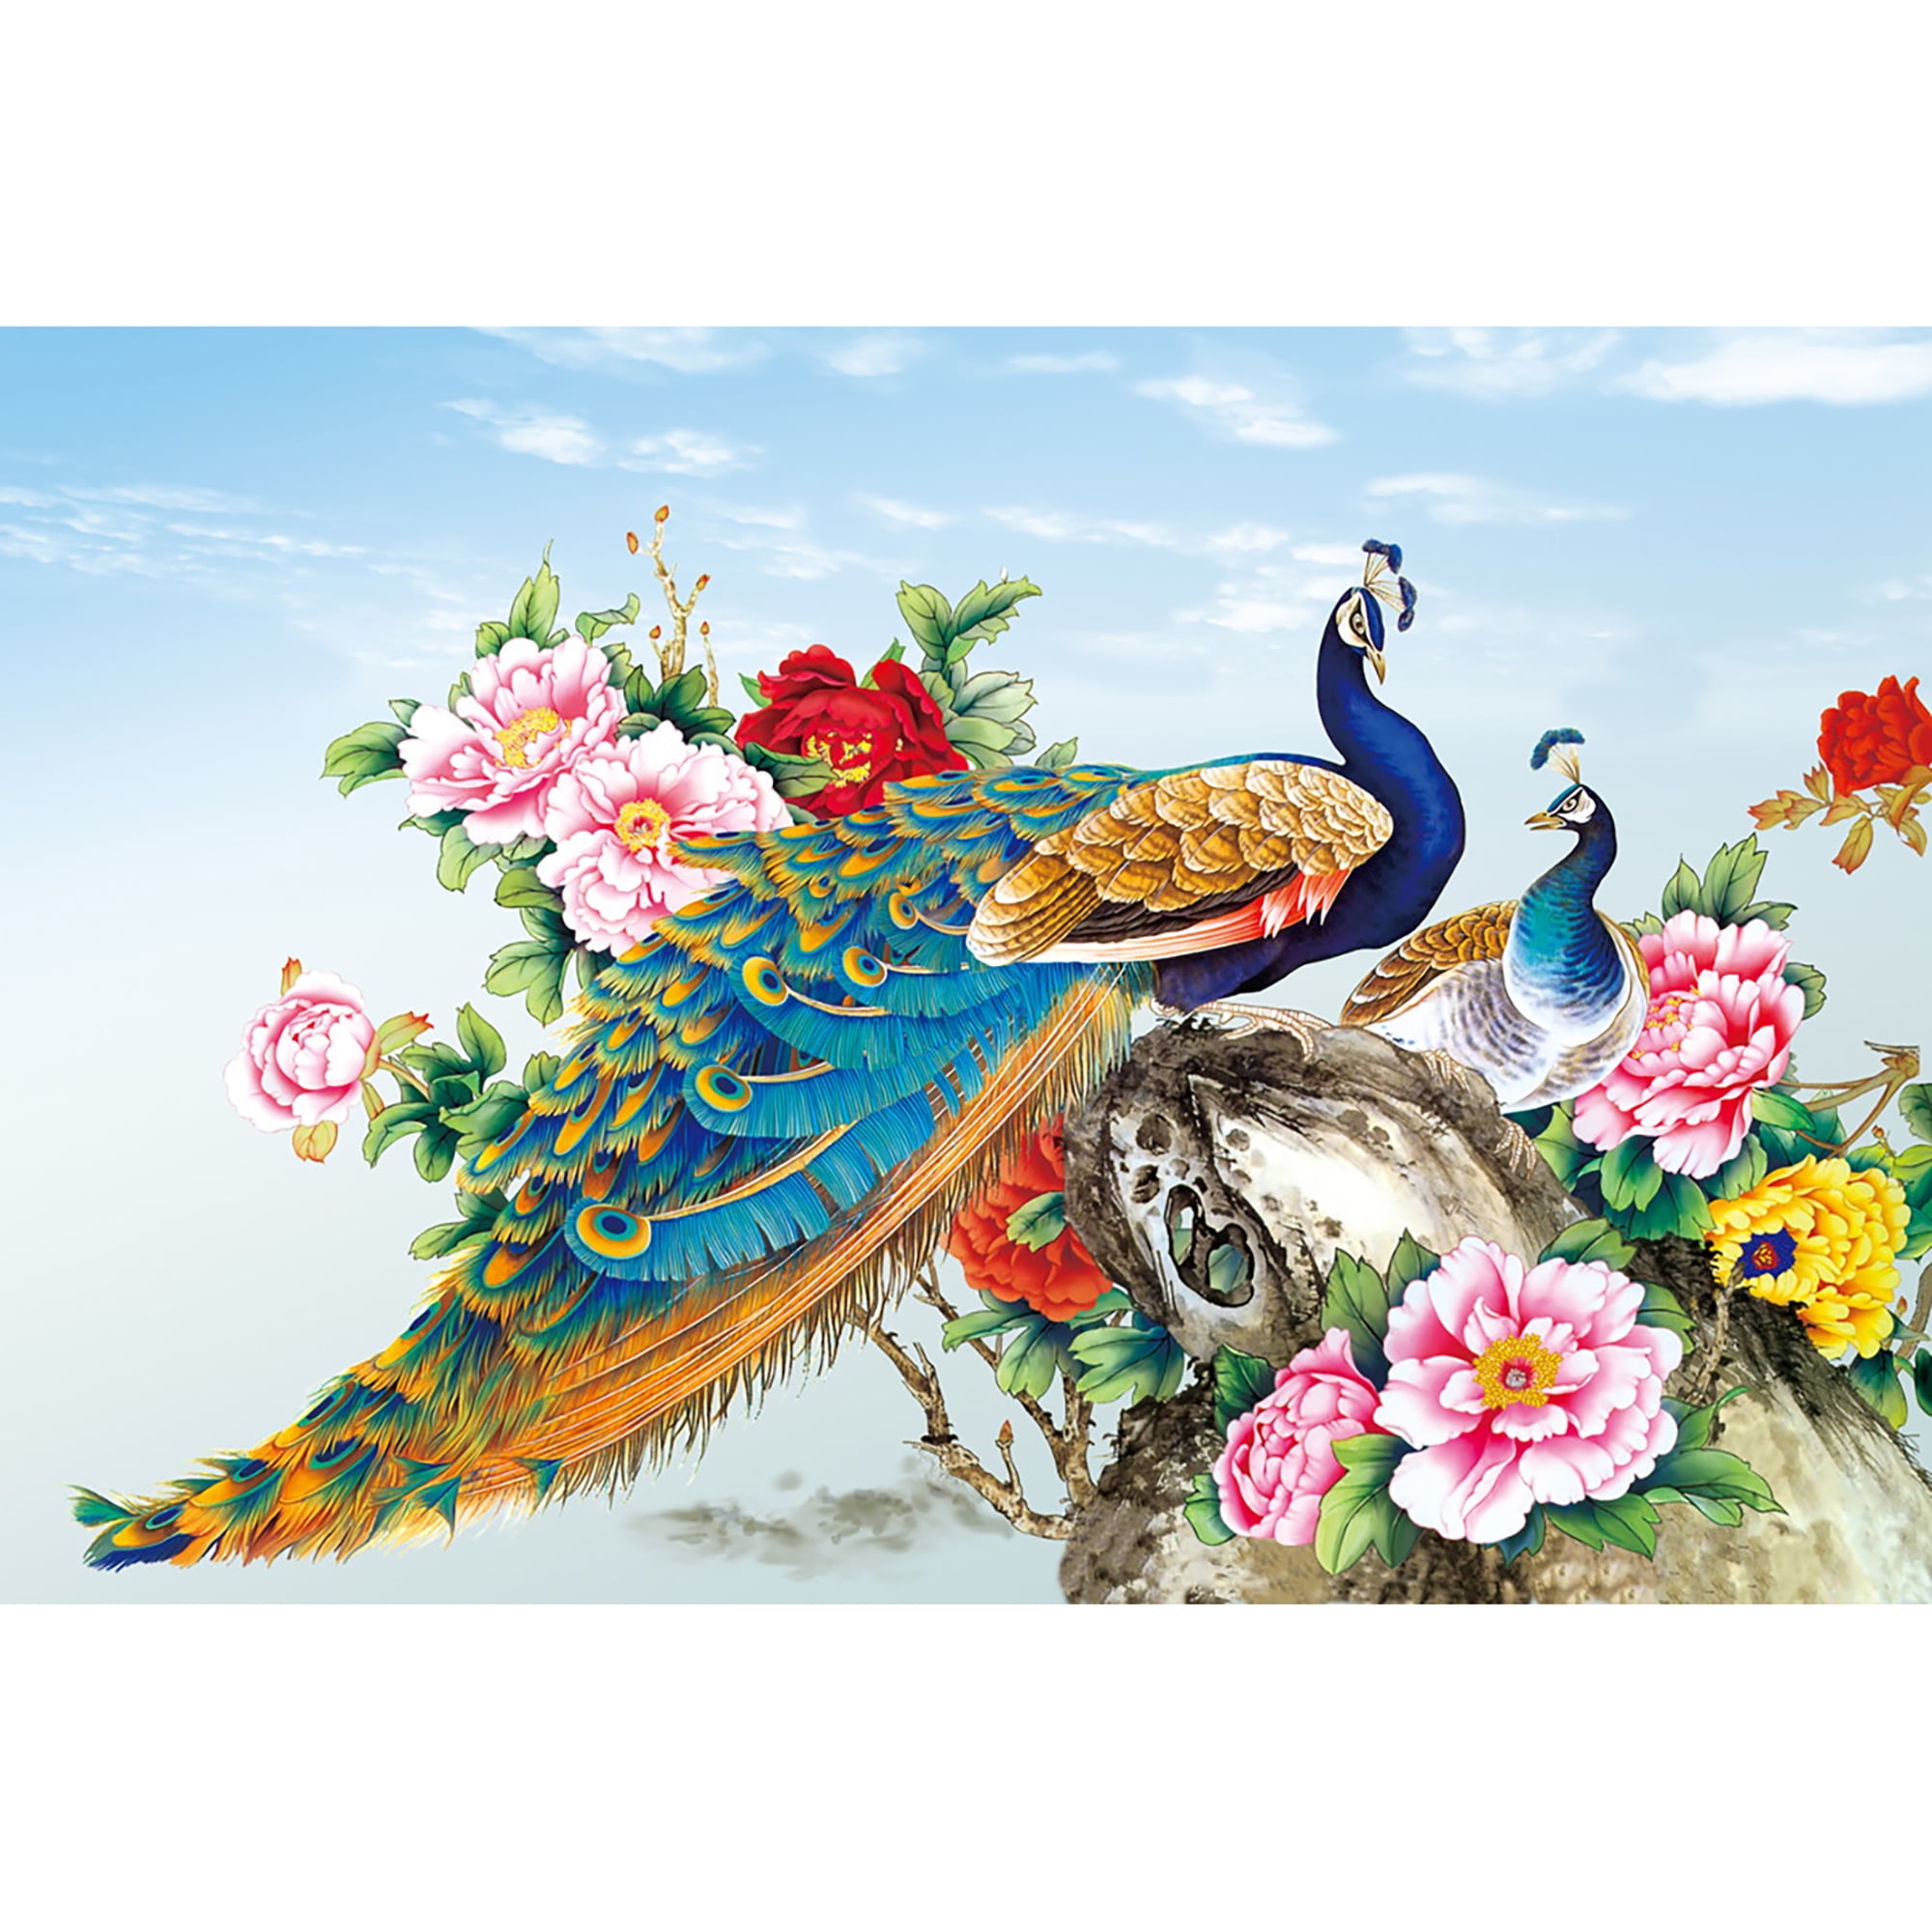 Full Drill 5D DIY Peacock Diamond Painting Embroidery Cross Stitch Kits Crafts 